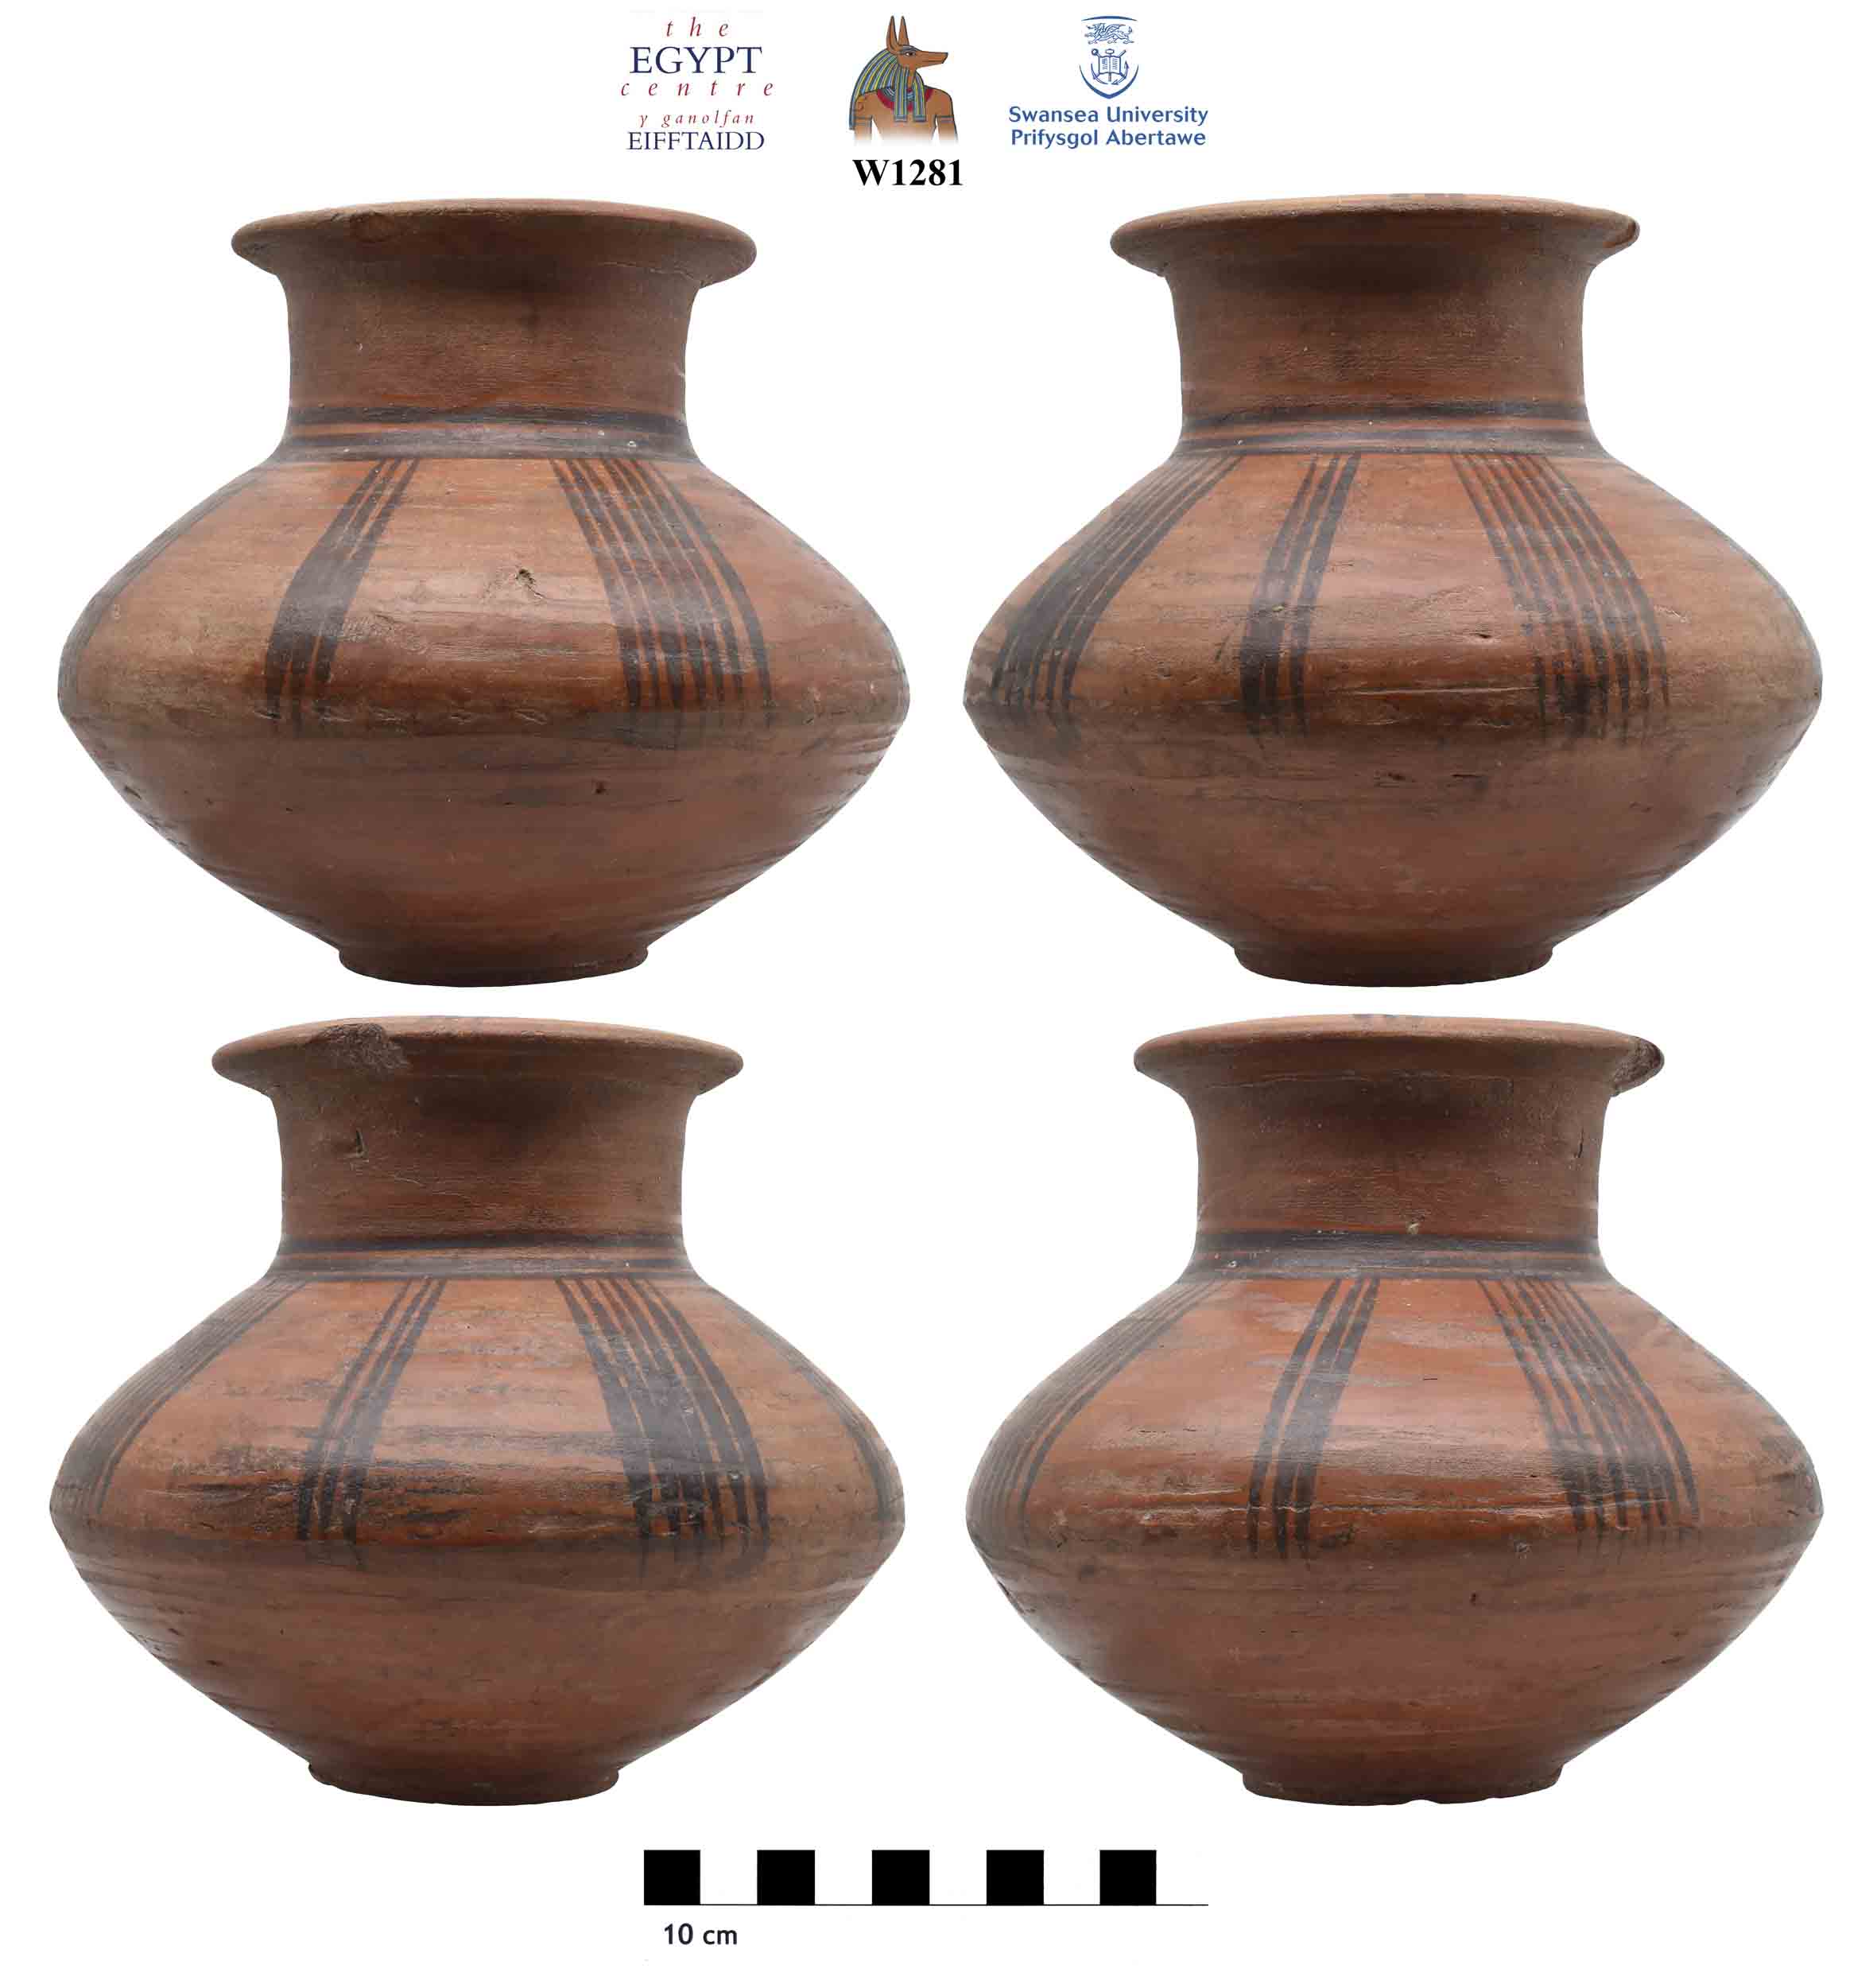 Image for: Carinated pottery vessel with black painted decoration